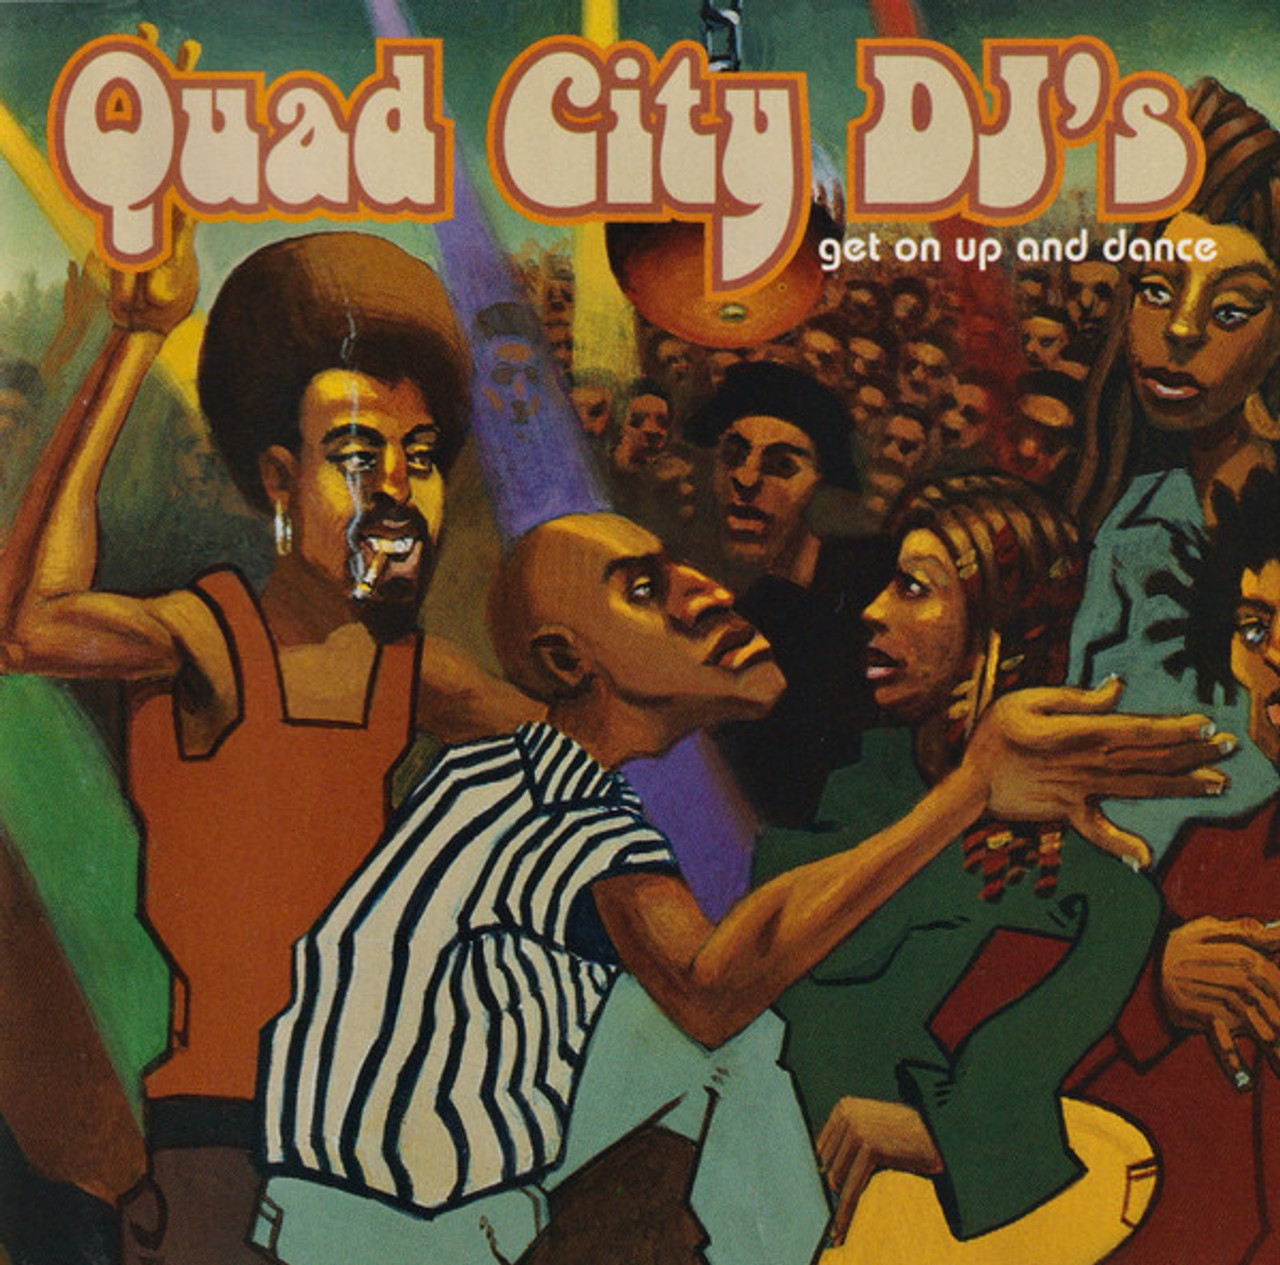 *USED* GET ON UP AND DANCE - QUAD CITY DJ'S (#075678290527)